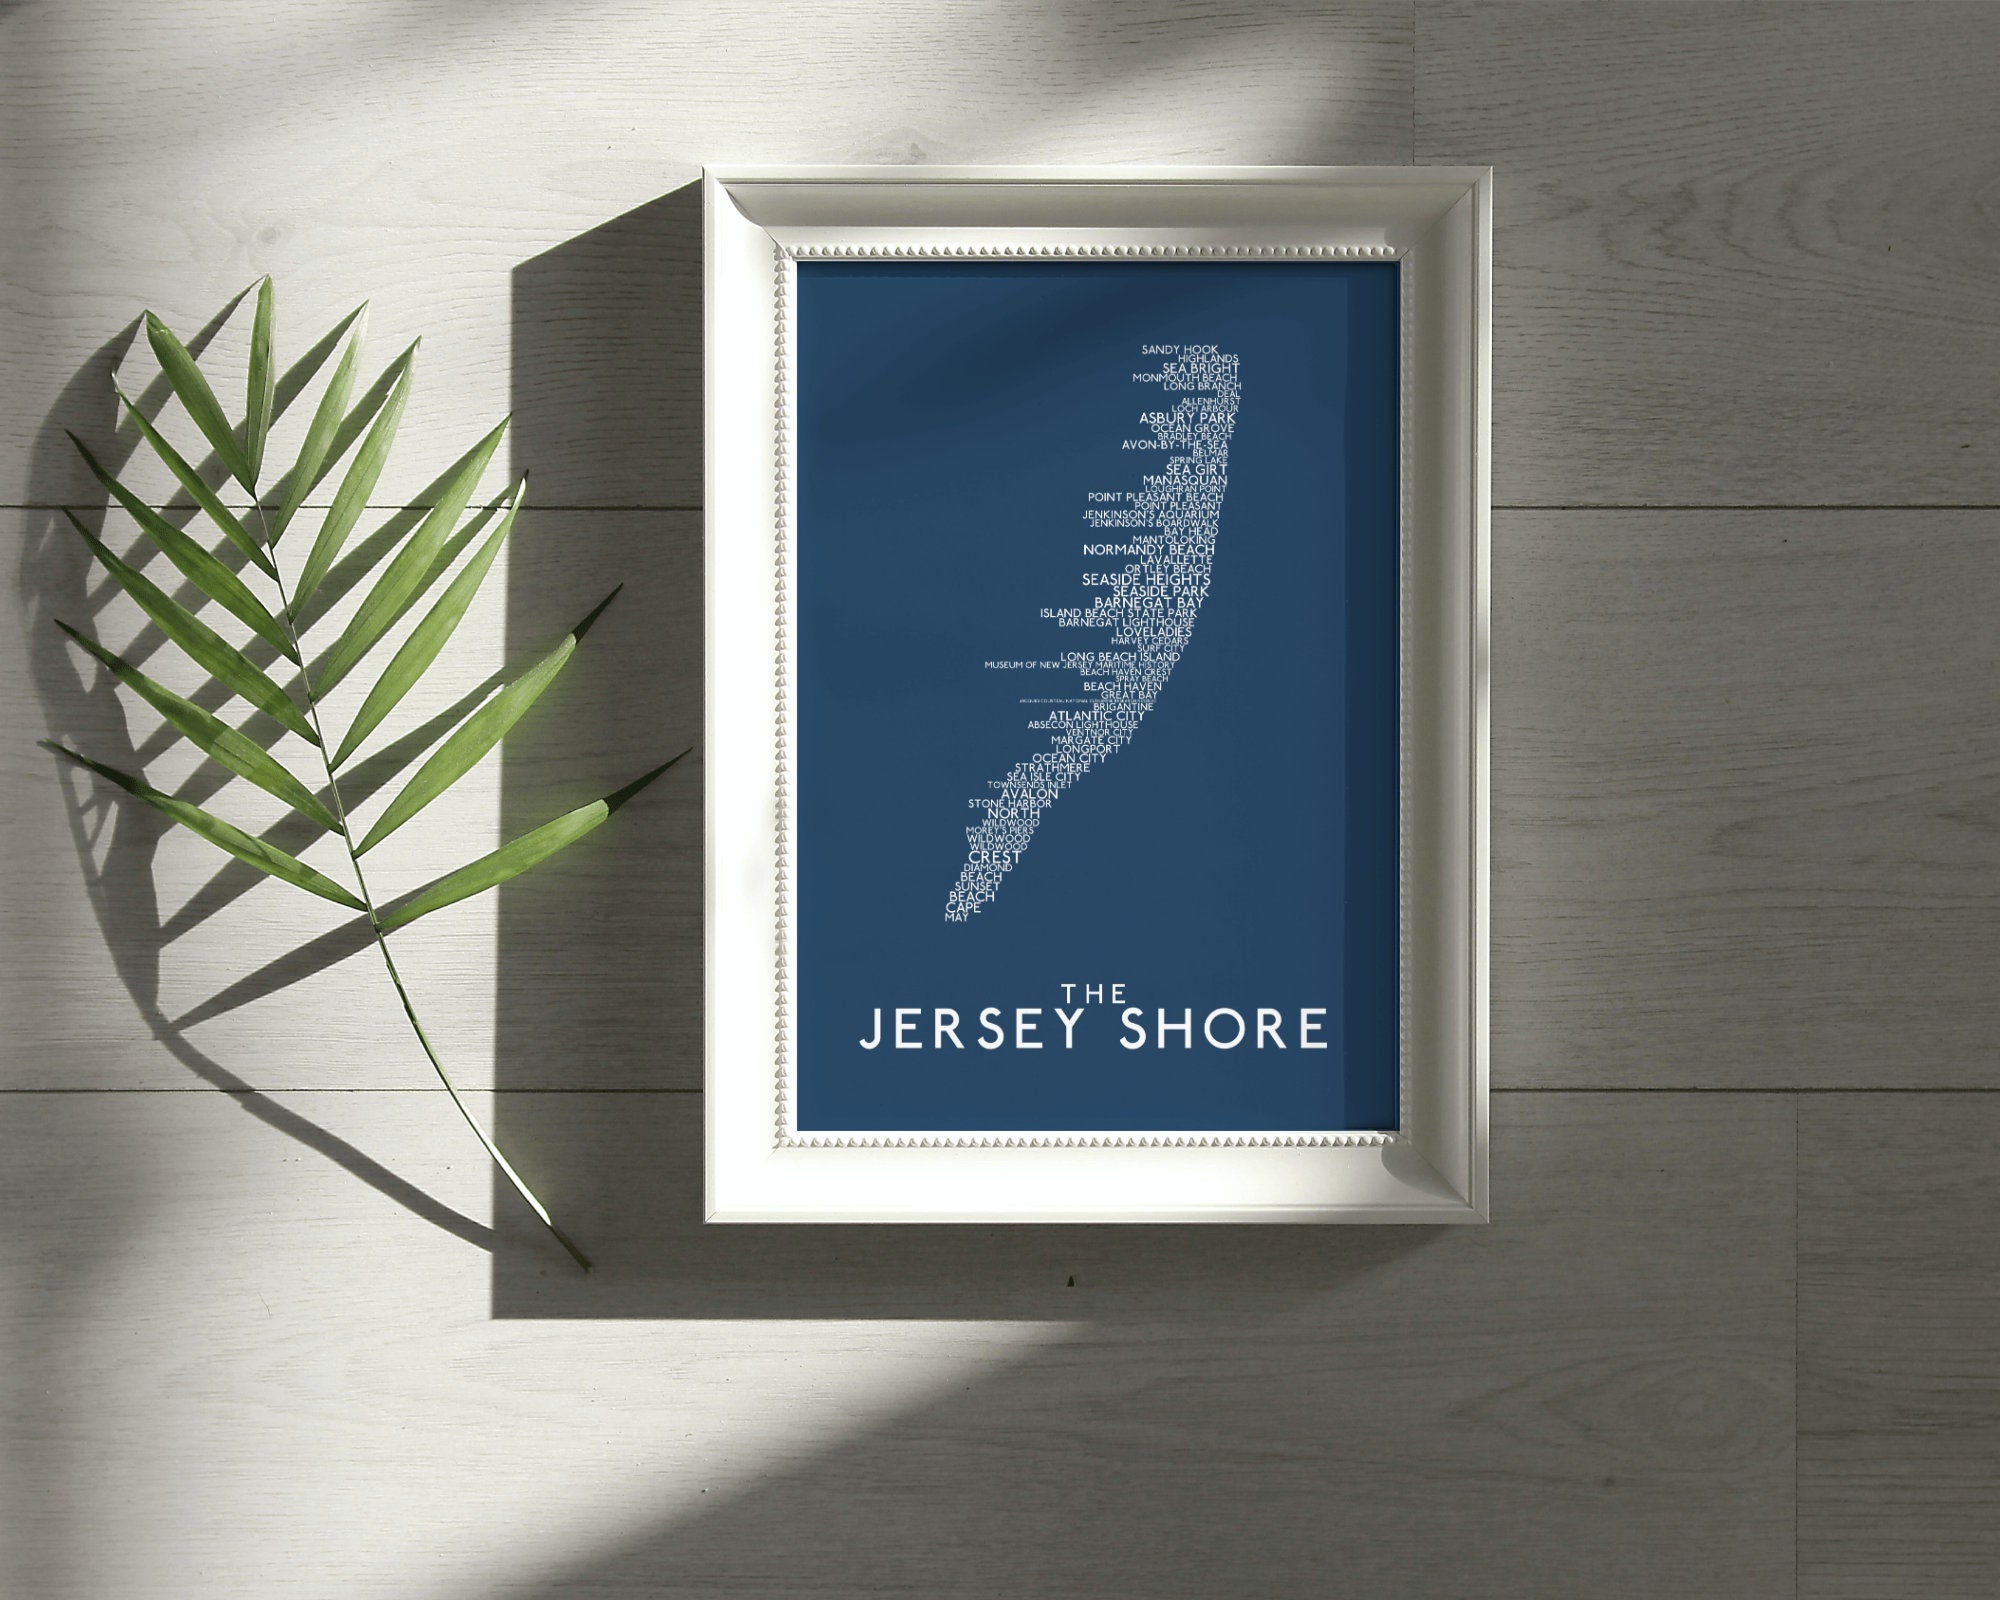 SNOOKI FROM JERSEY SHORE Art Board Print for Sale by ematzzz